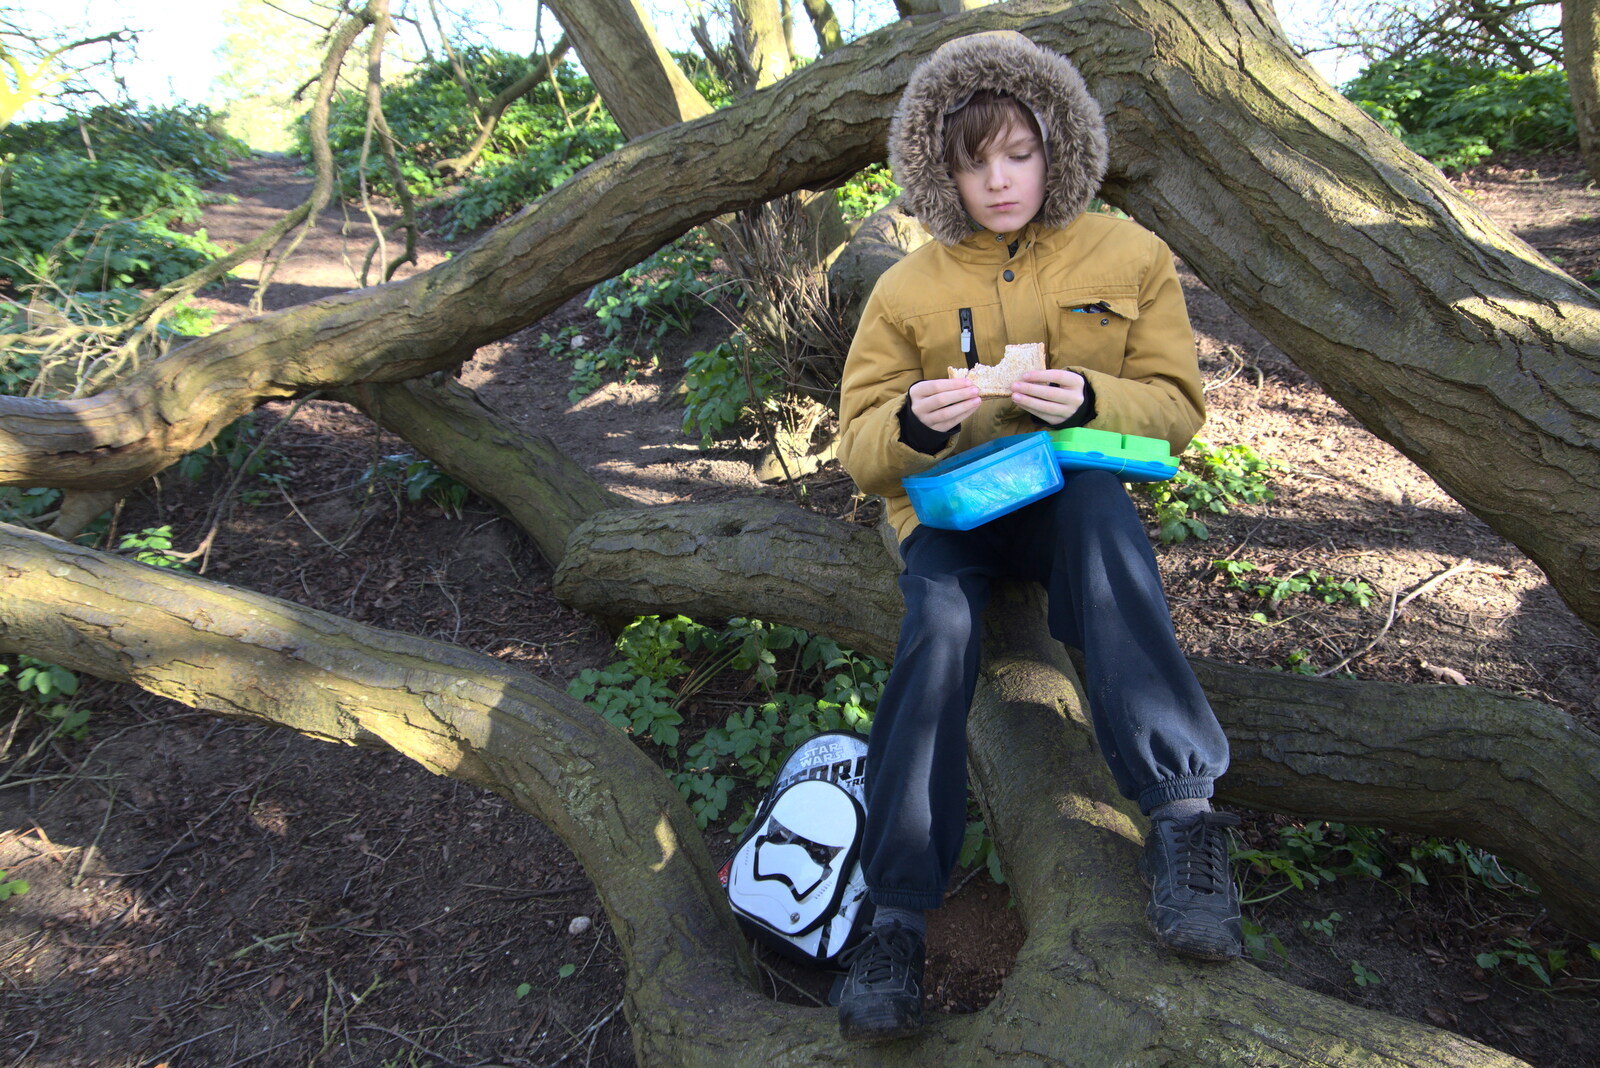 Harry has a picnic in a tree from A Trip to Orford Castle, Orford, Suffolk - 26th February 2022